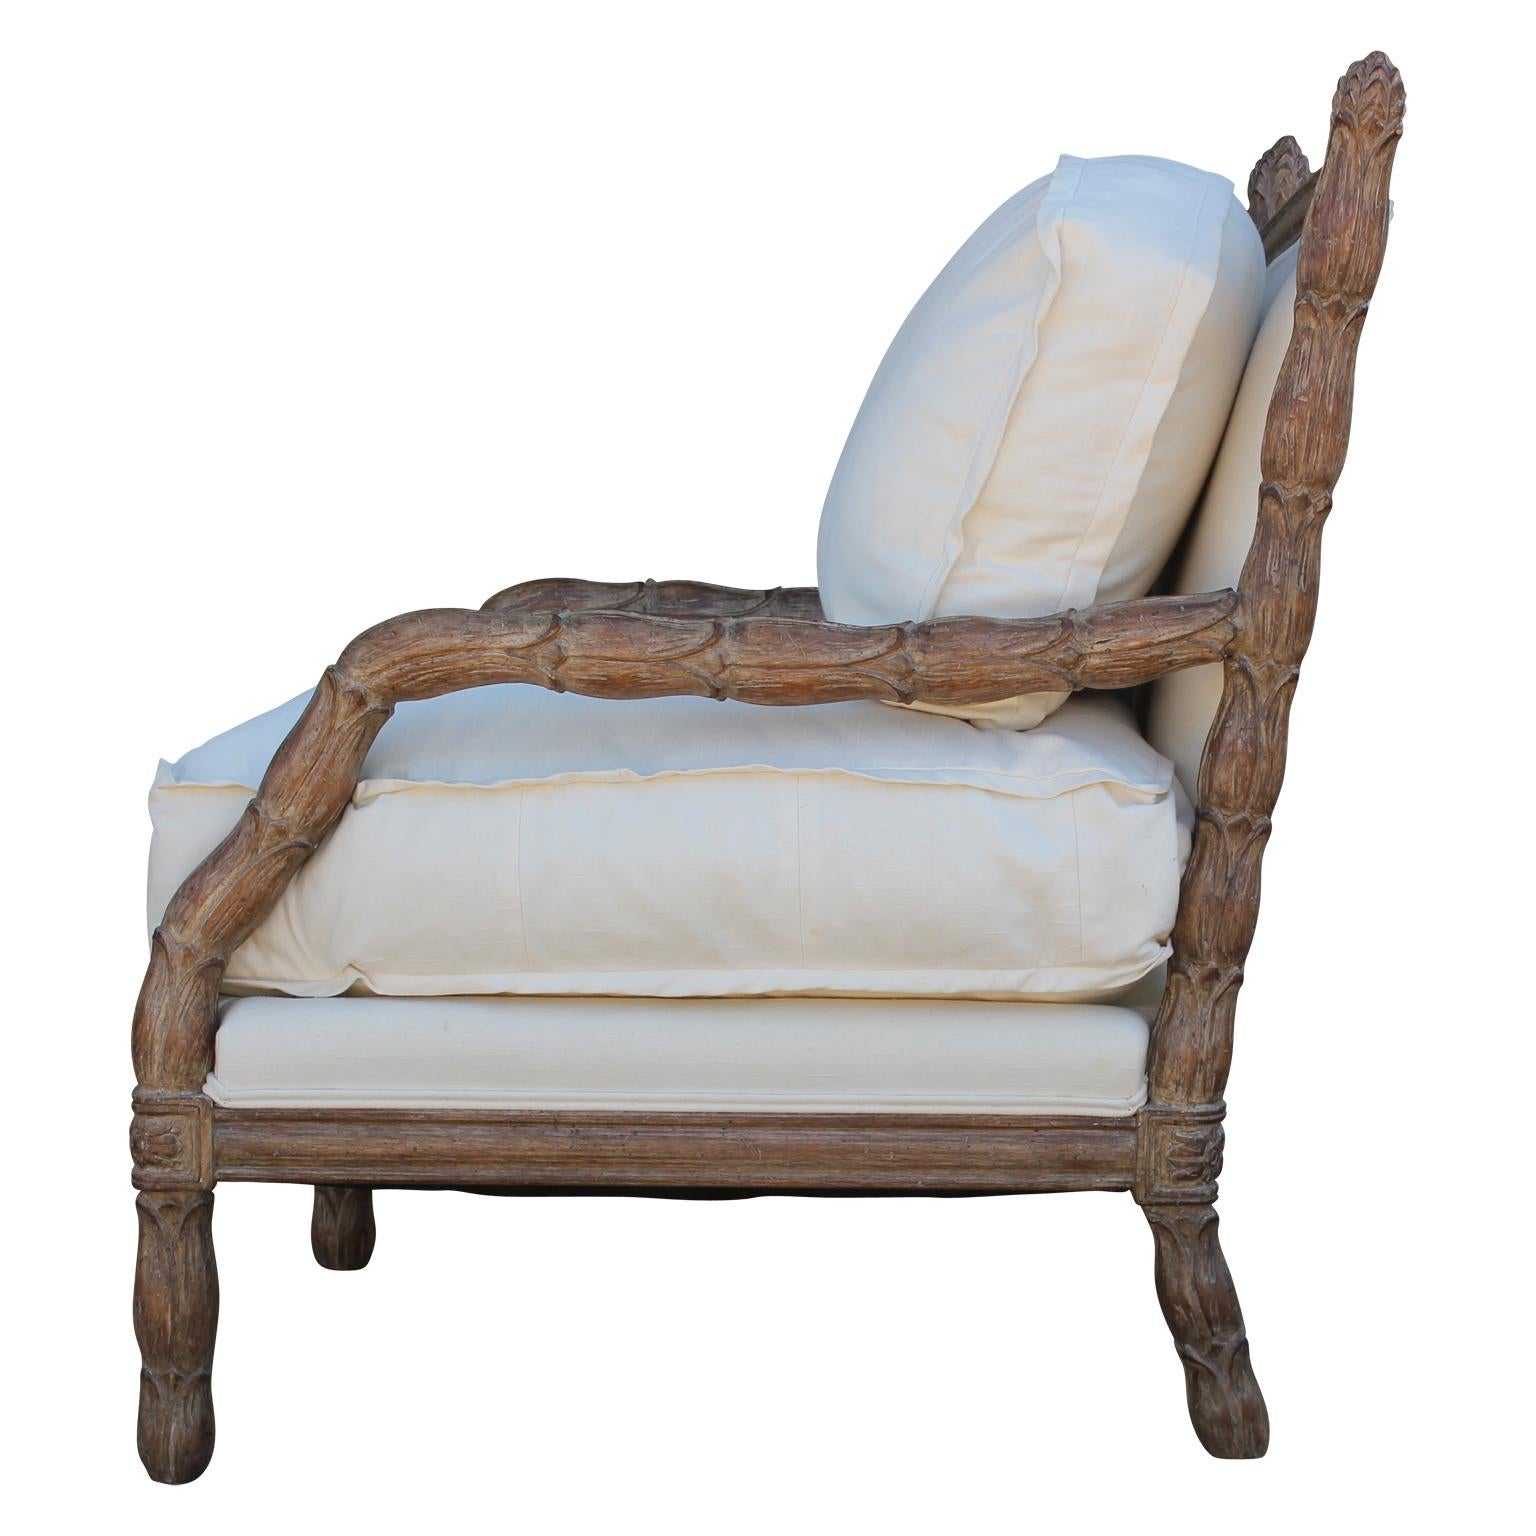 A beautiful Marge Carson carved French style bergere chair. The white fabric is in wonderful vintage condition but could be reupholstered in fabric of your choice, circa 20th century.